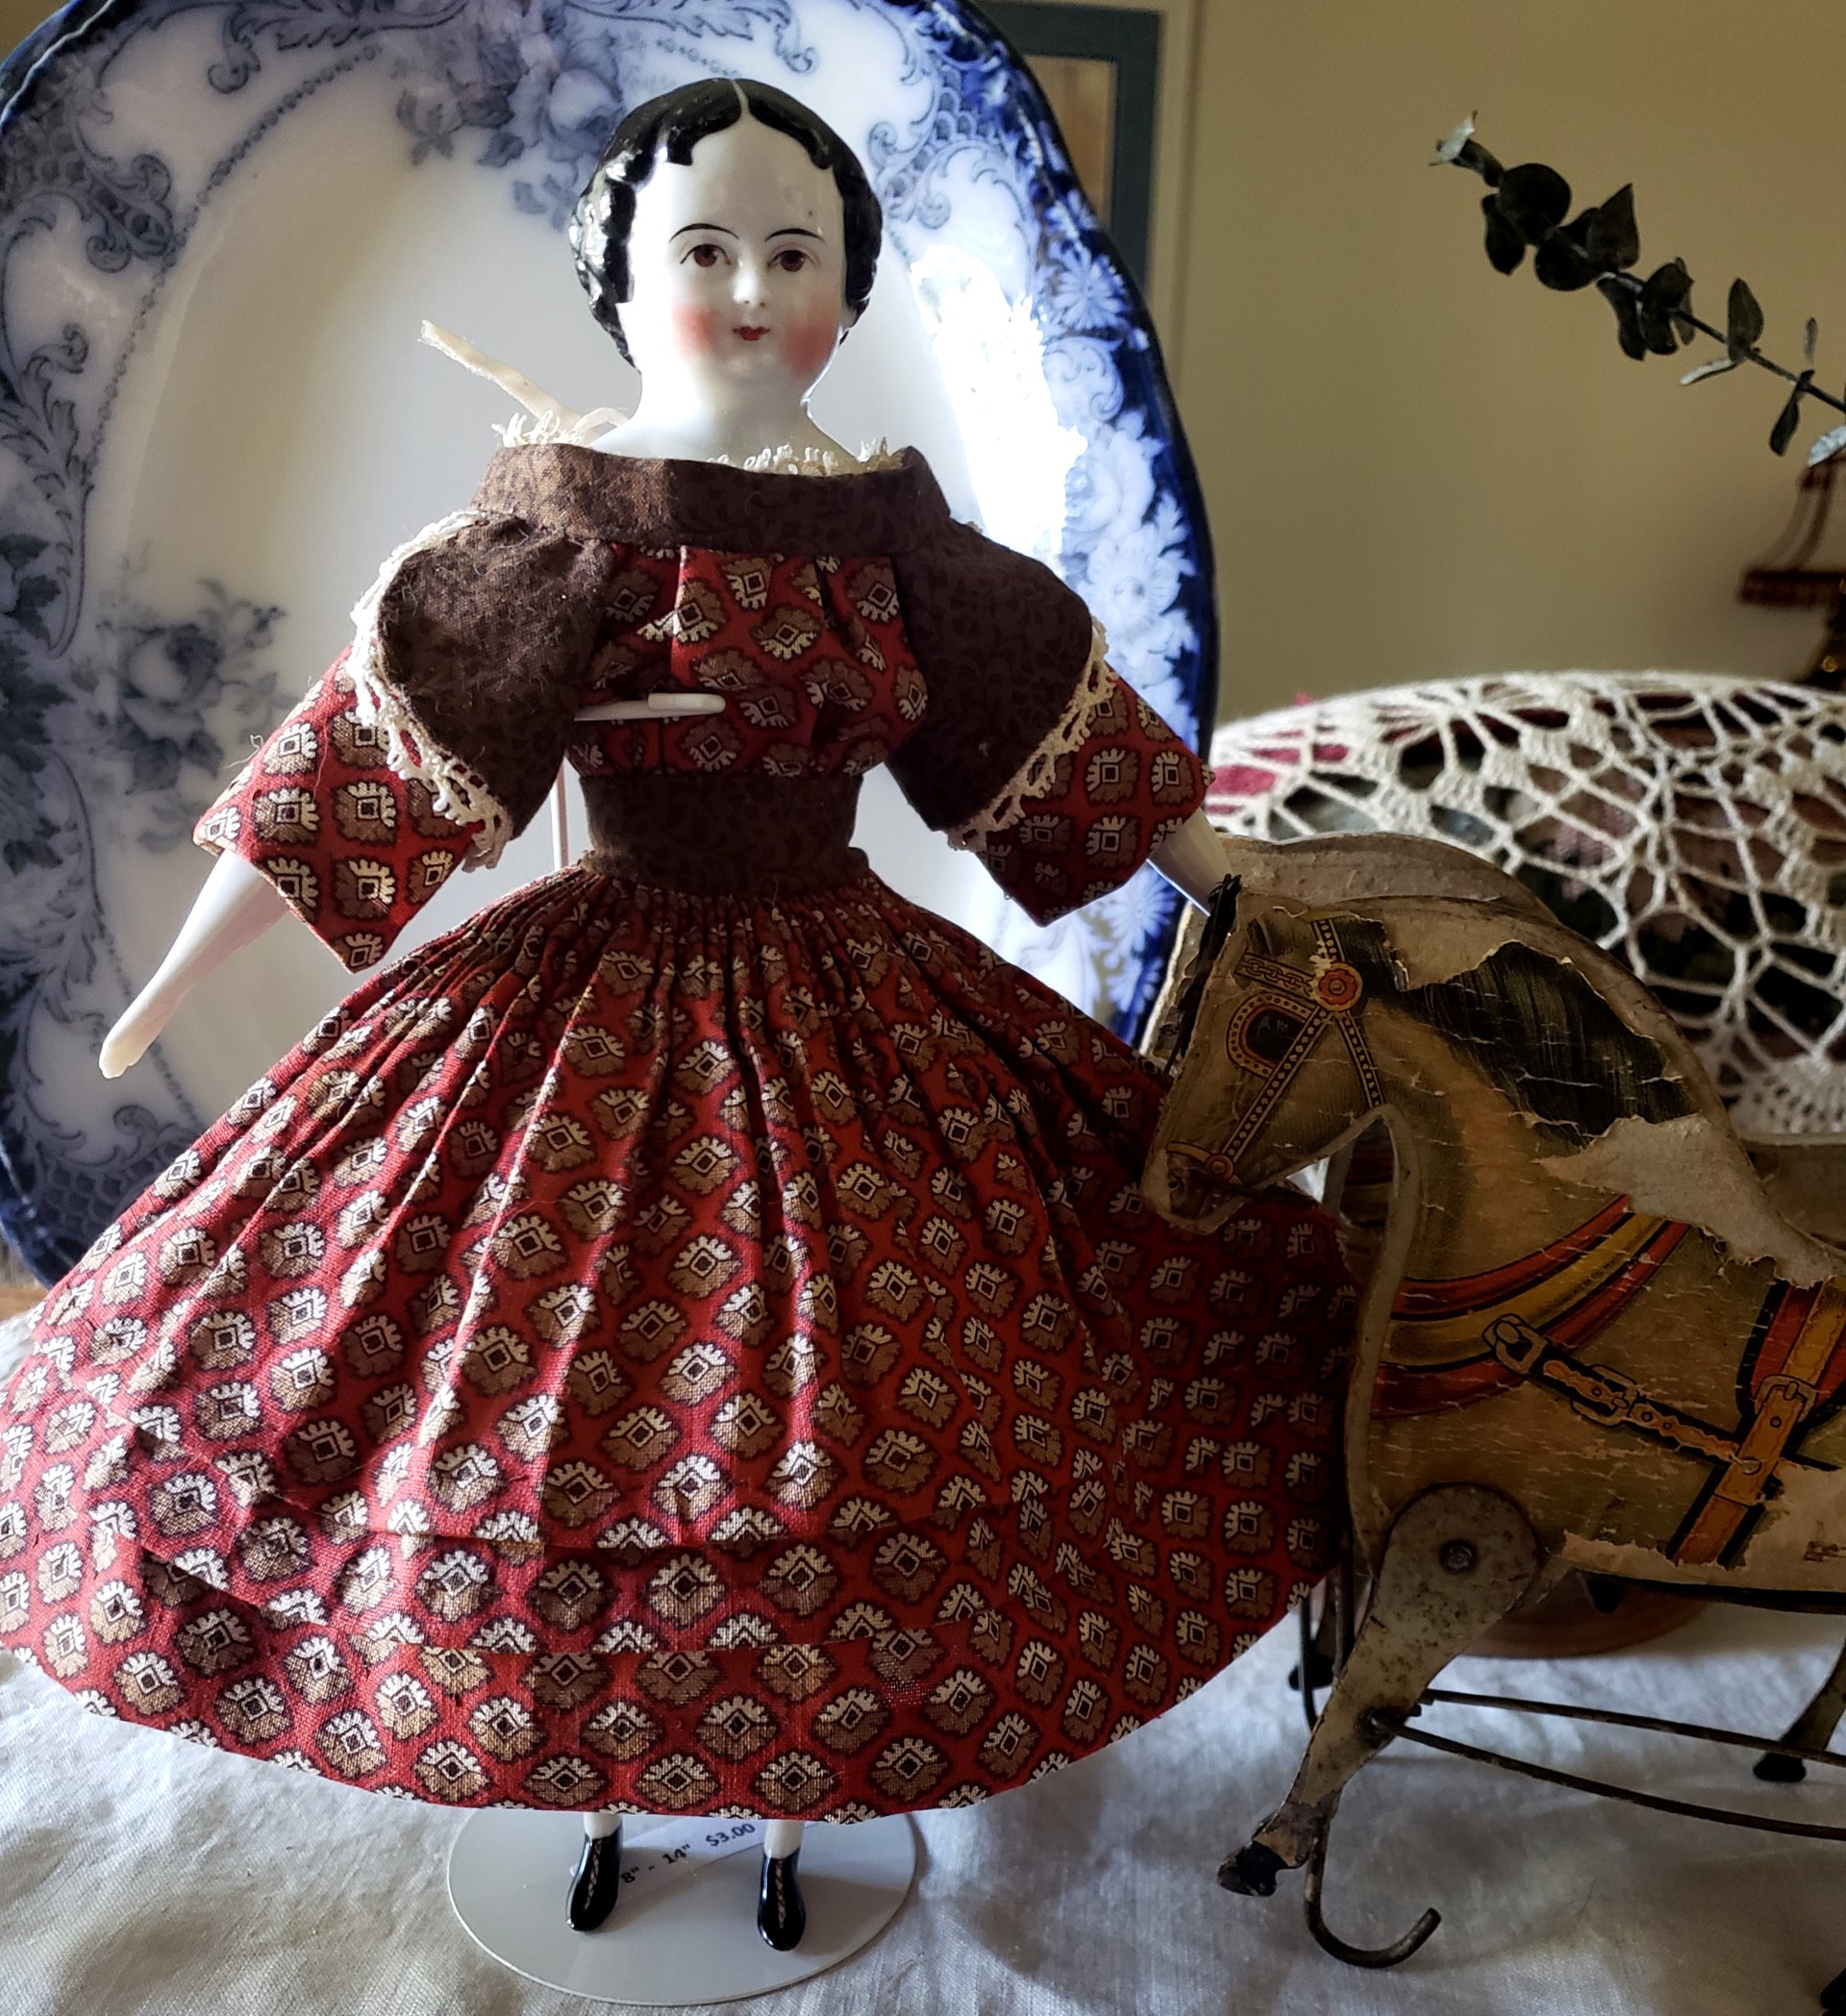 VintageDollPlaza - Makers of Doll Display Boxes and Dress Forms